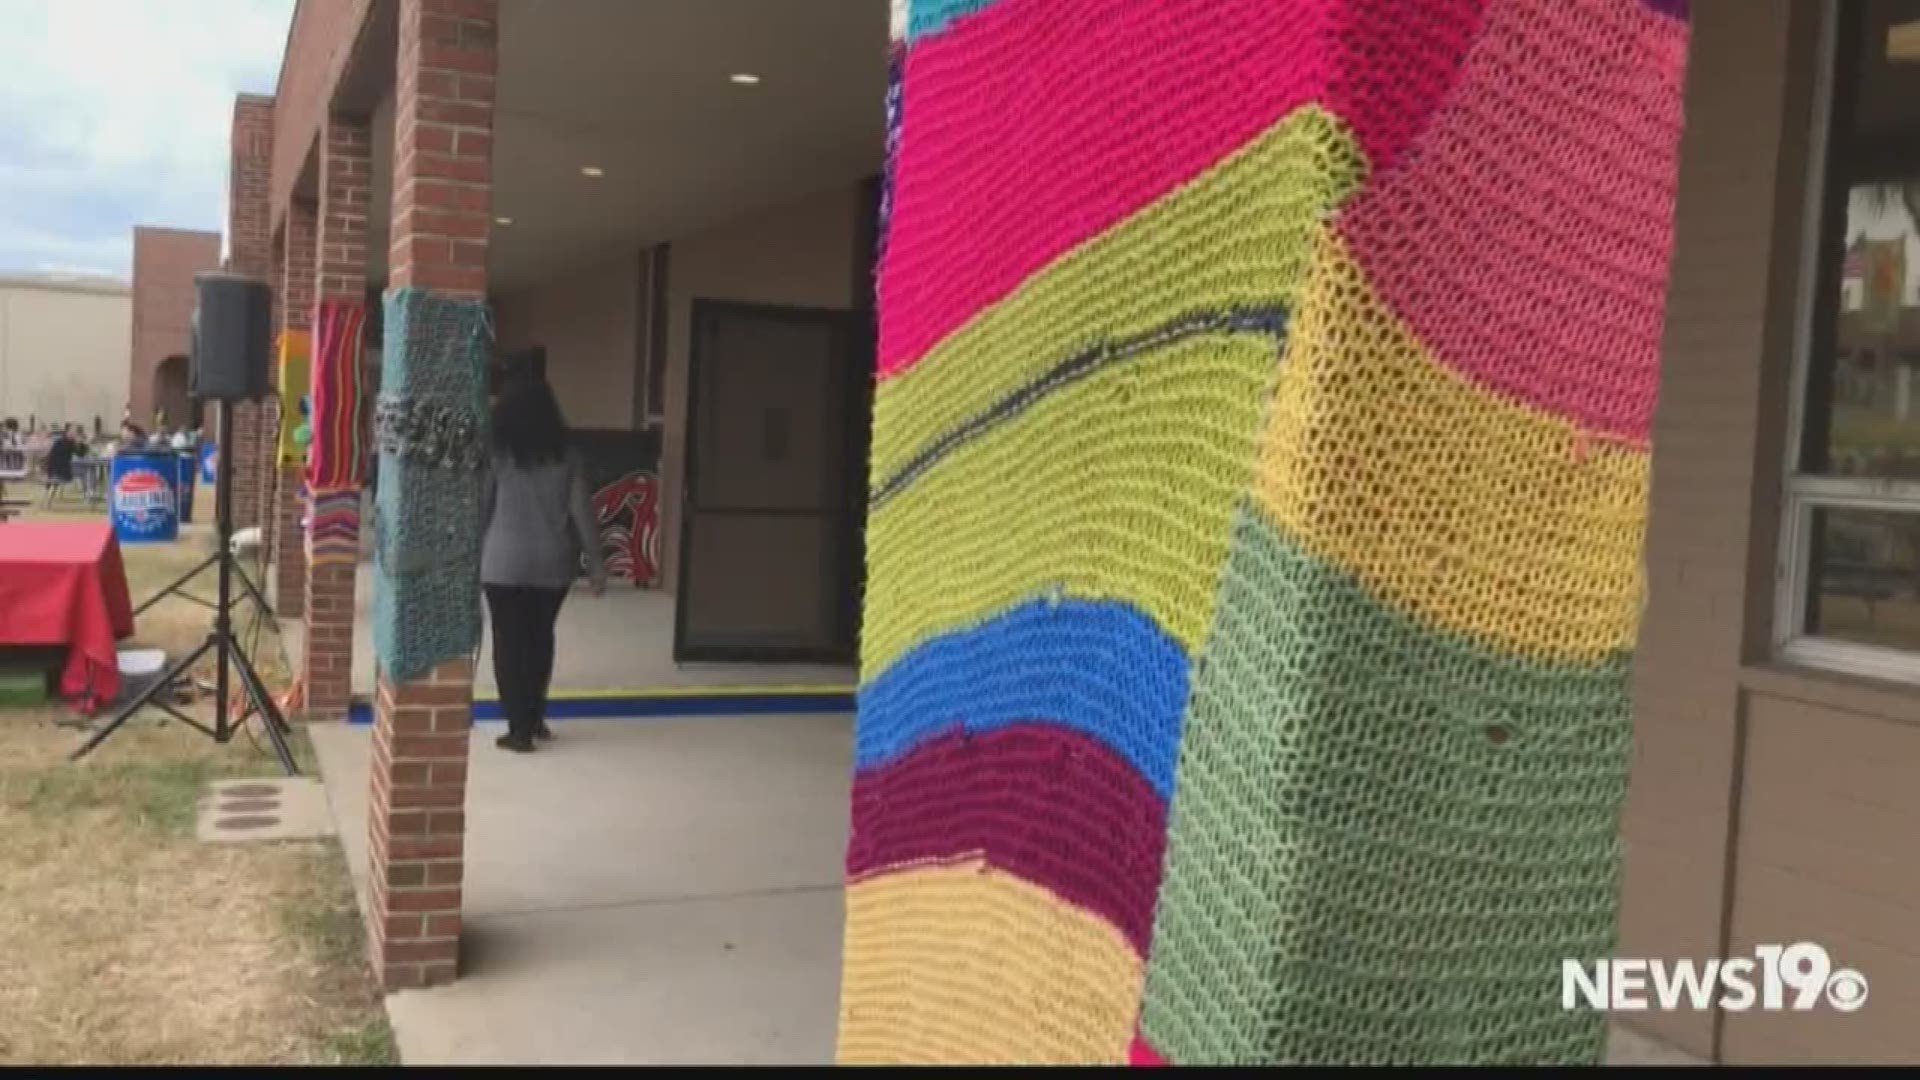 The yarn bombers were out at the South Carolina State Fair decorating the buildings.